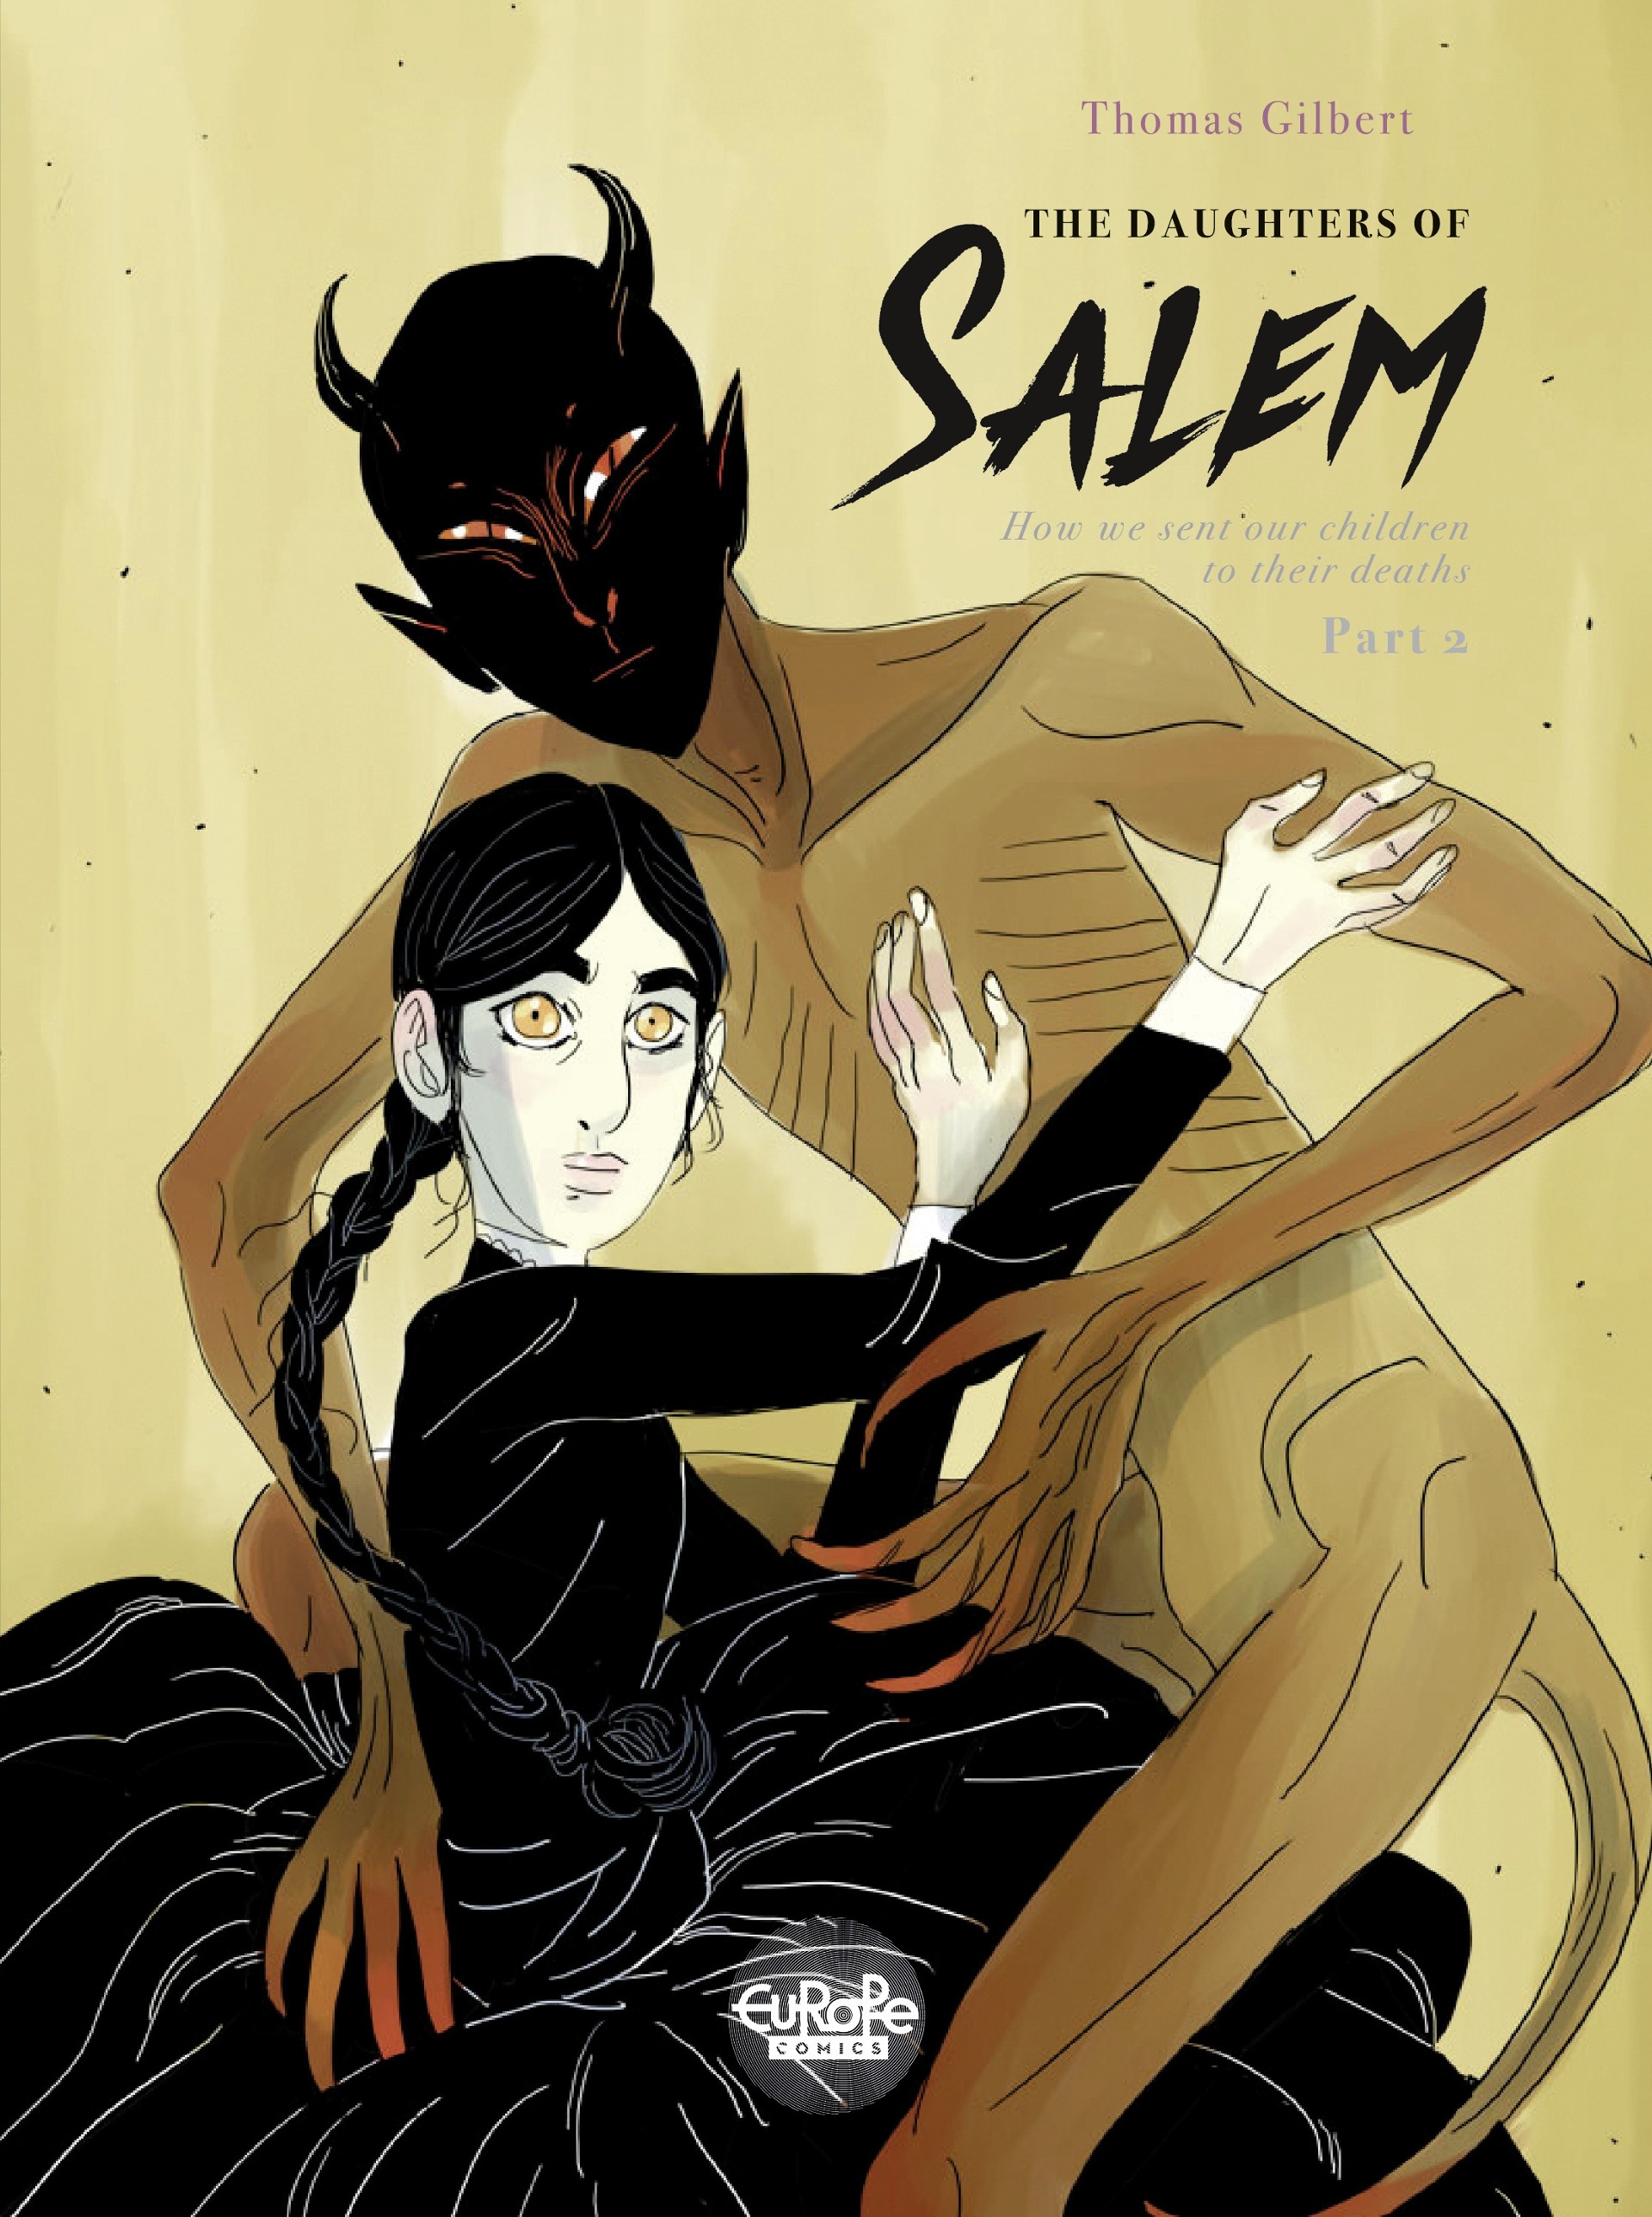 Read online The Daughters of Salem comic -  Issue # TPB 2 - 1